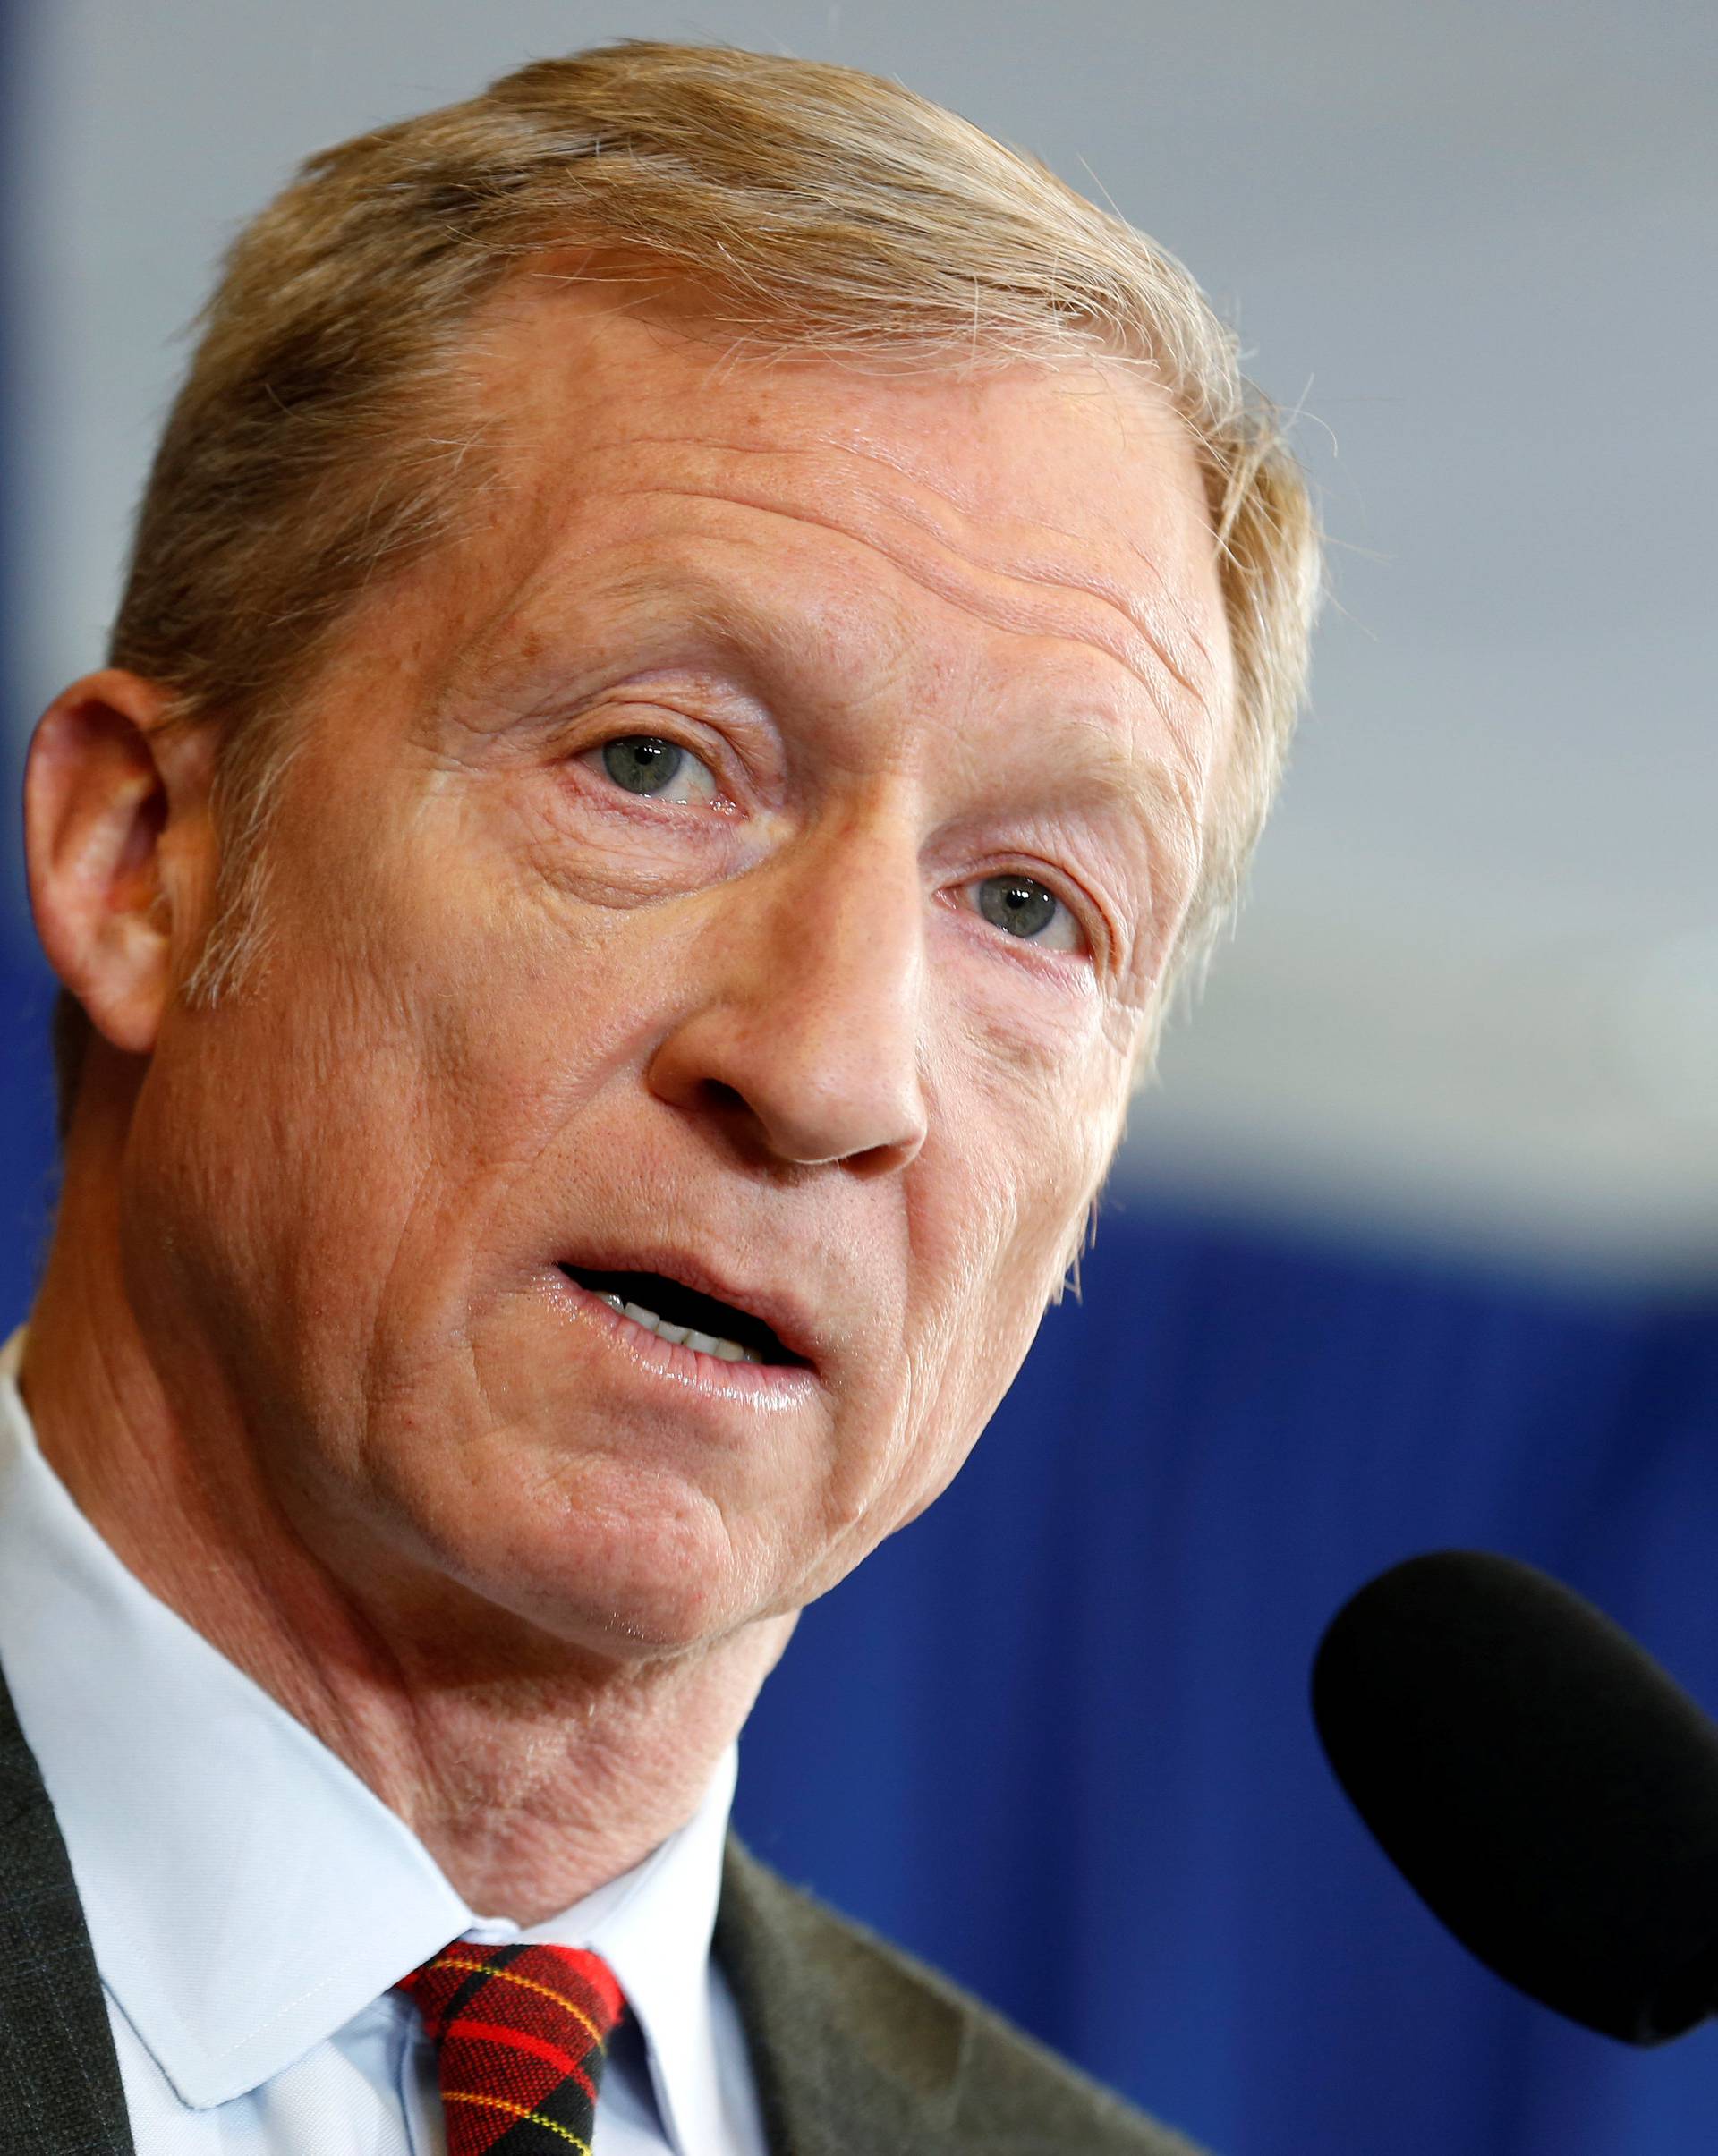 Tom Steyer holds a news conference to announce plans for his political future in Washington